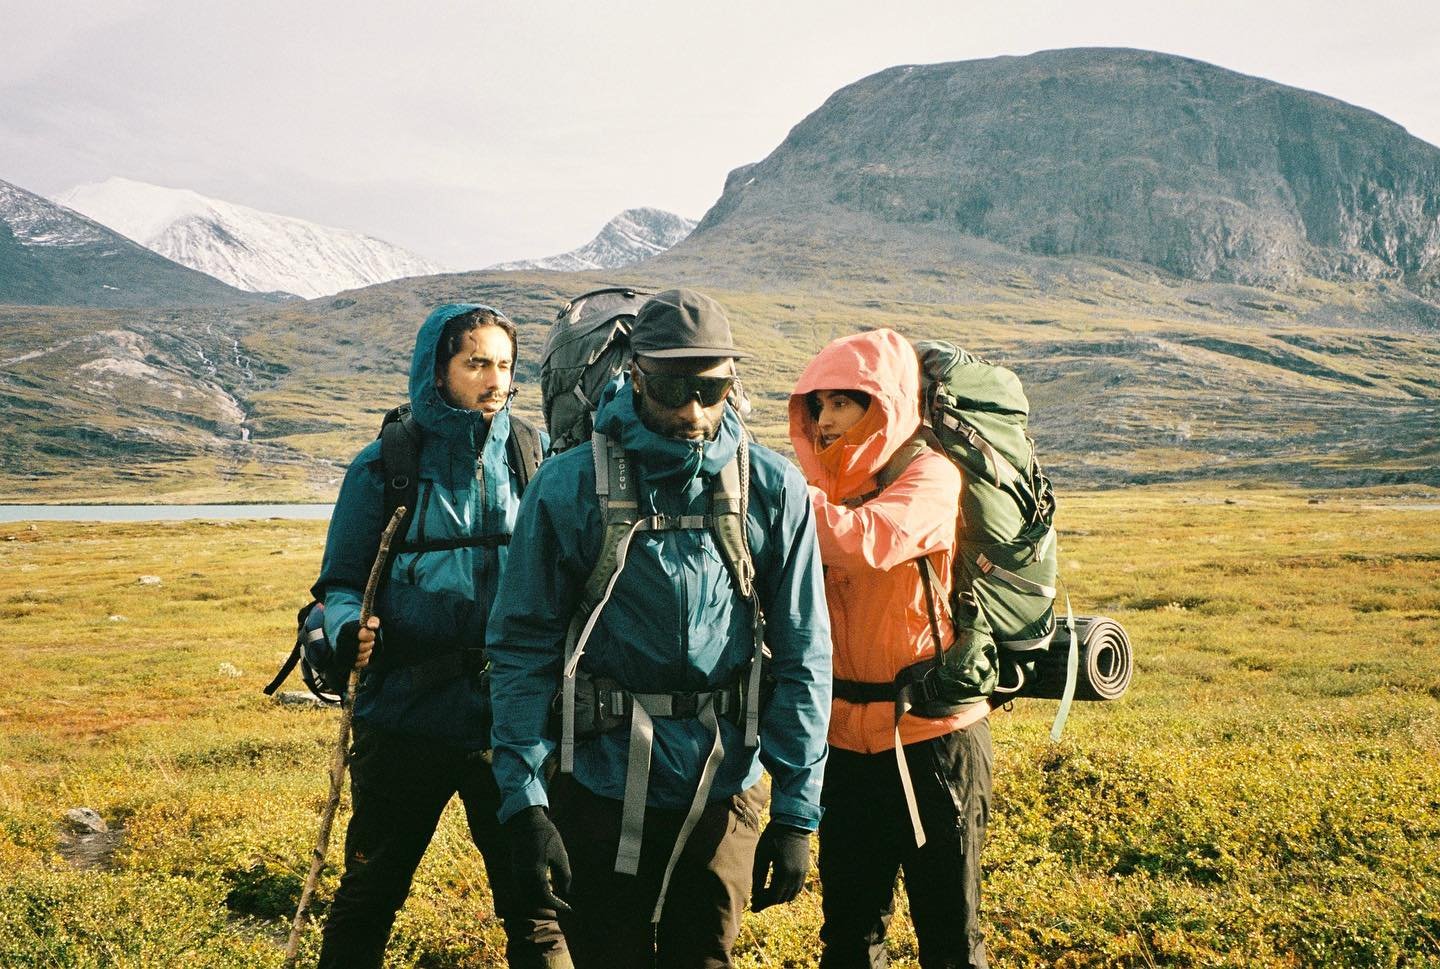 &ldquo;This photograph captures a transformative moment during a journey with Third Cultured Kids to the pristine wilderness of Abisko, Sweden. Situated in the northern reaches of the country, Abisko boasts the highest peaks and some of the most brea